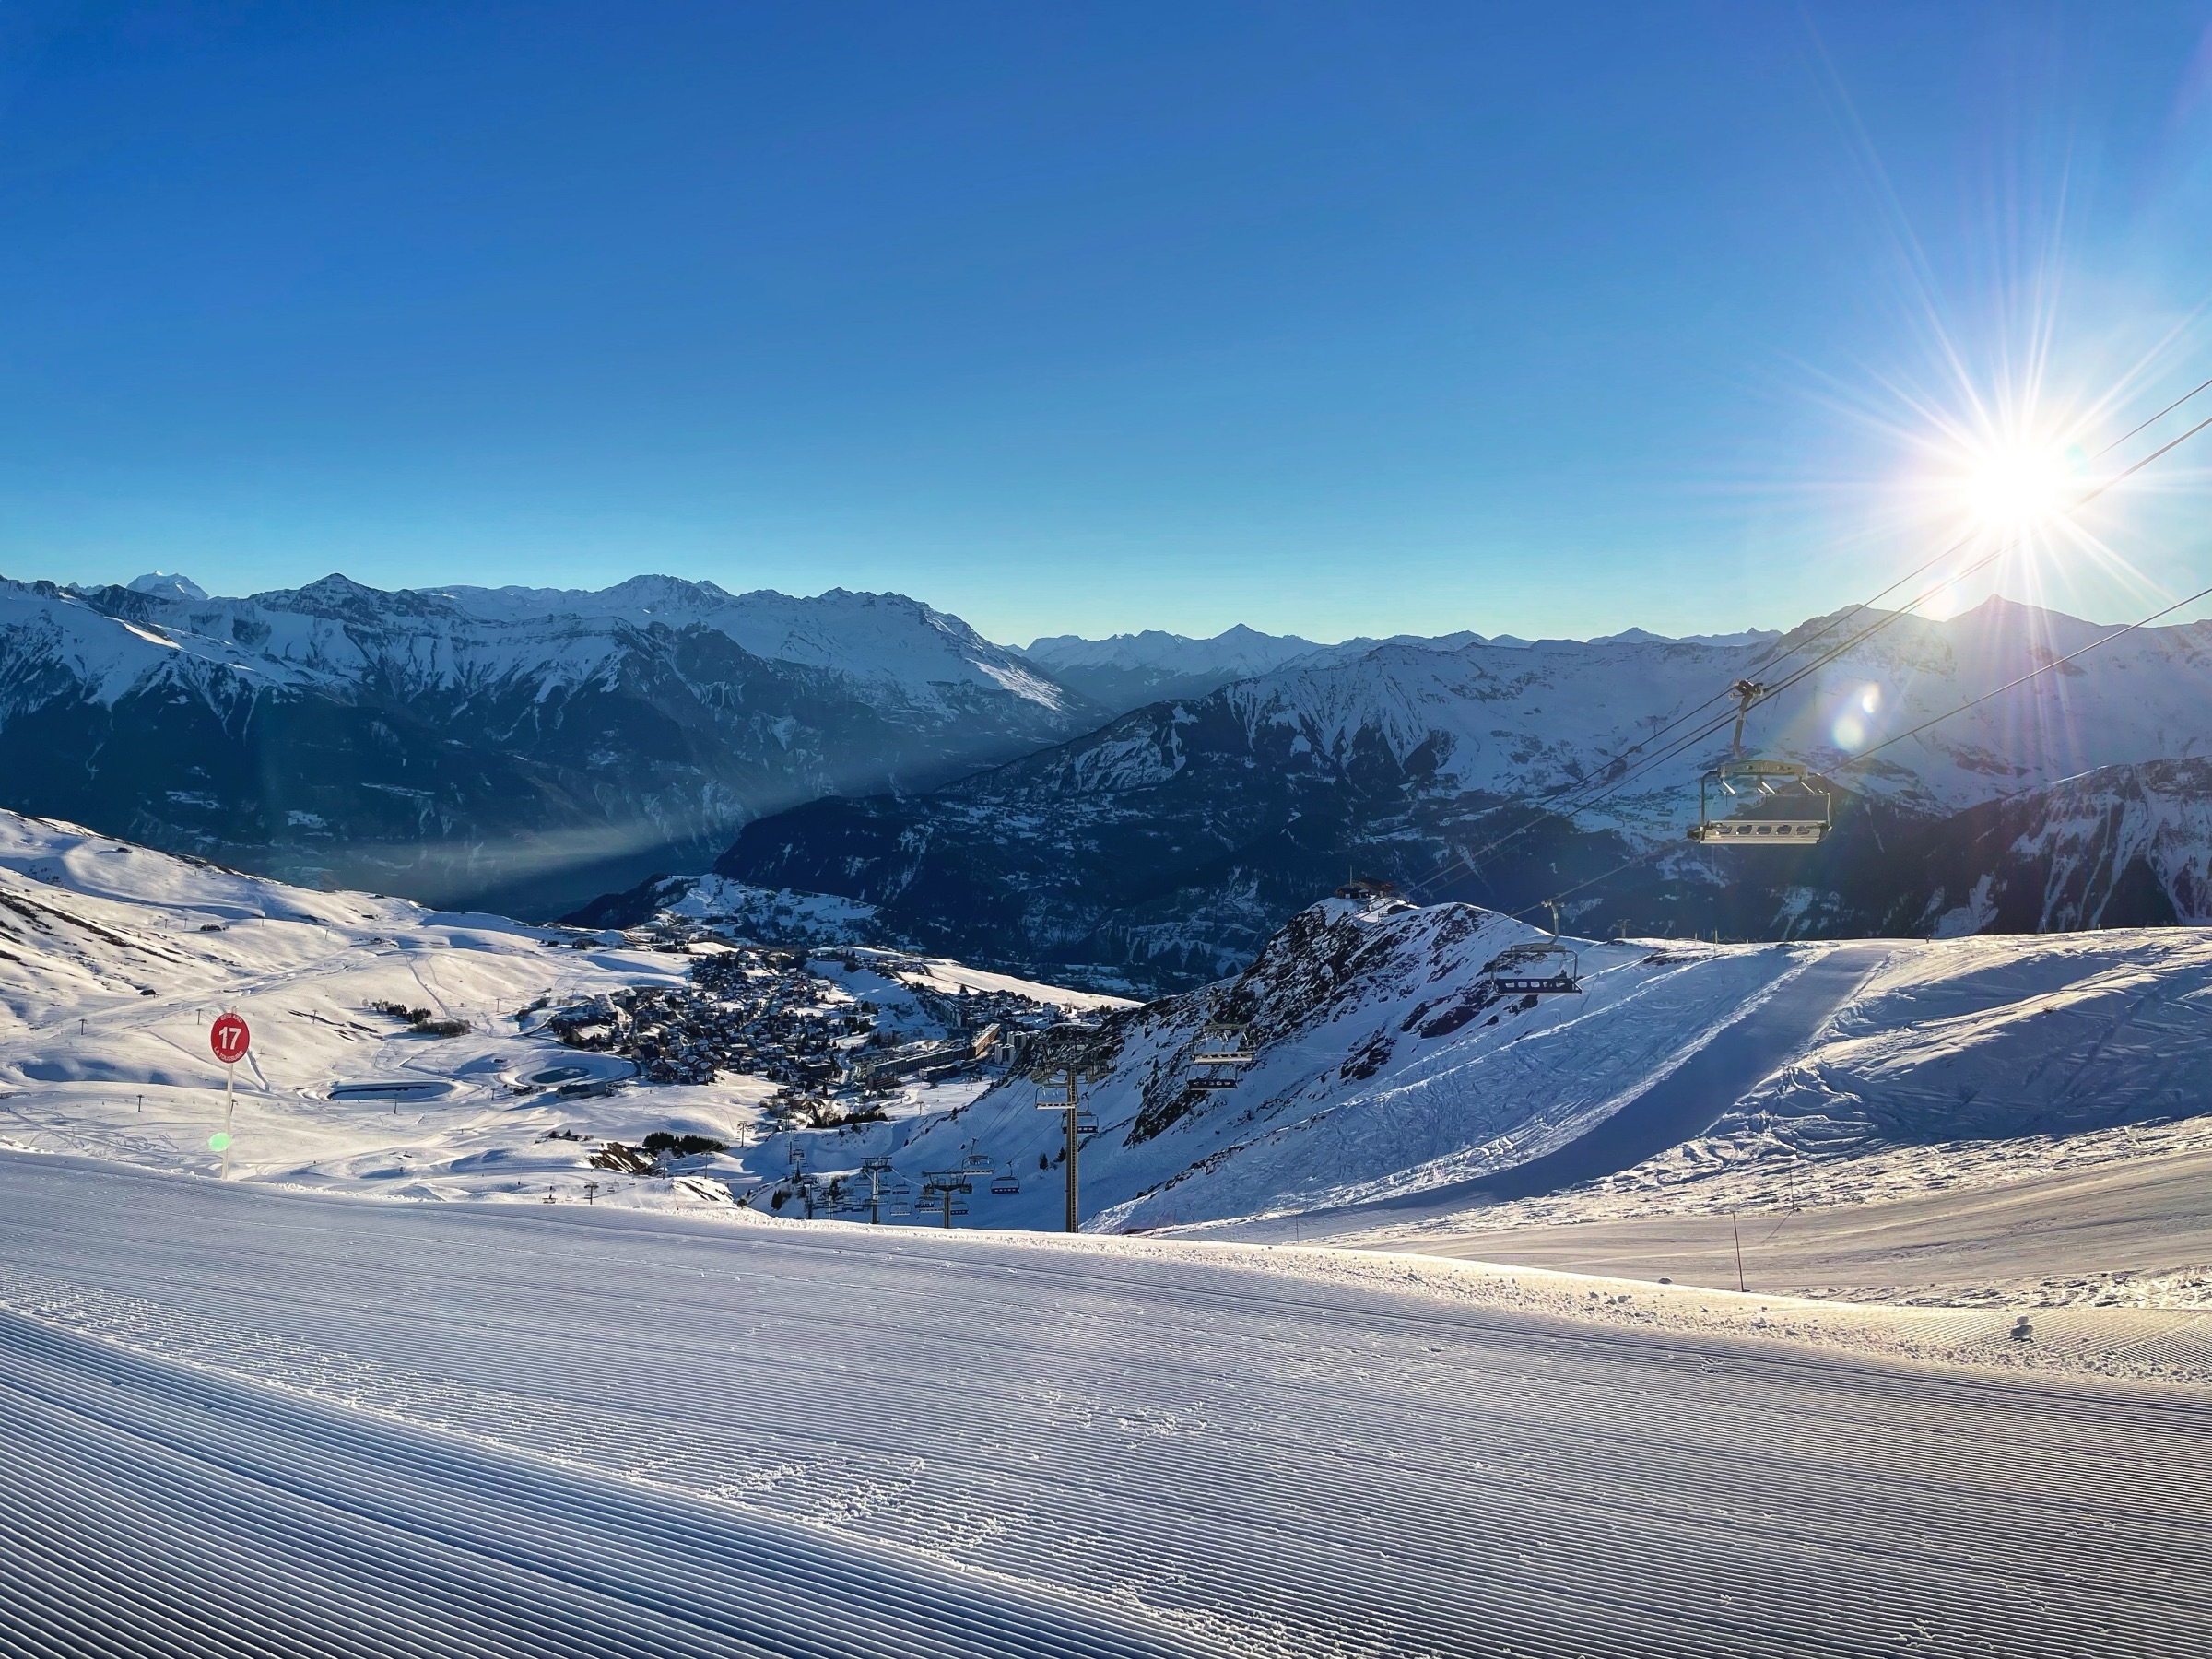 Sunrise photo in the winter. La Toussuire and Maurienne valley seen from Bellard. The foreground shows trails of the famous in the snow, followed by a plunging view of the resort, and the mountains in the background. Beautiful sunlight on the right enhances the scene